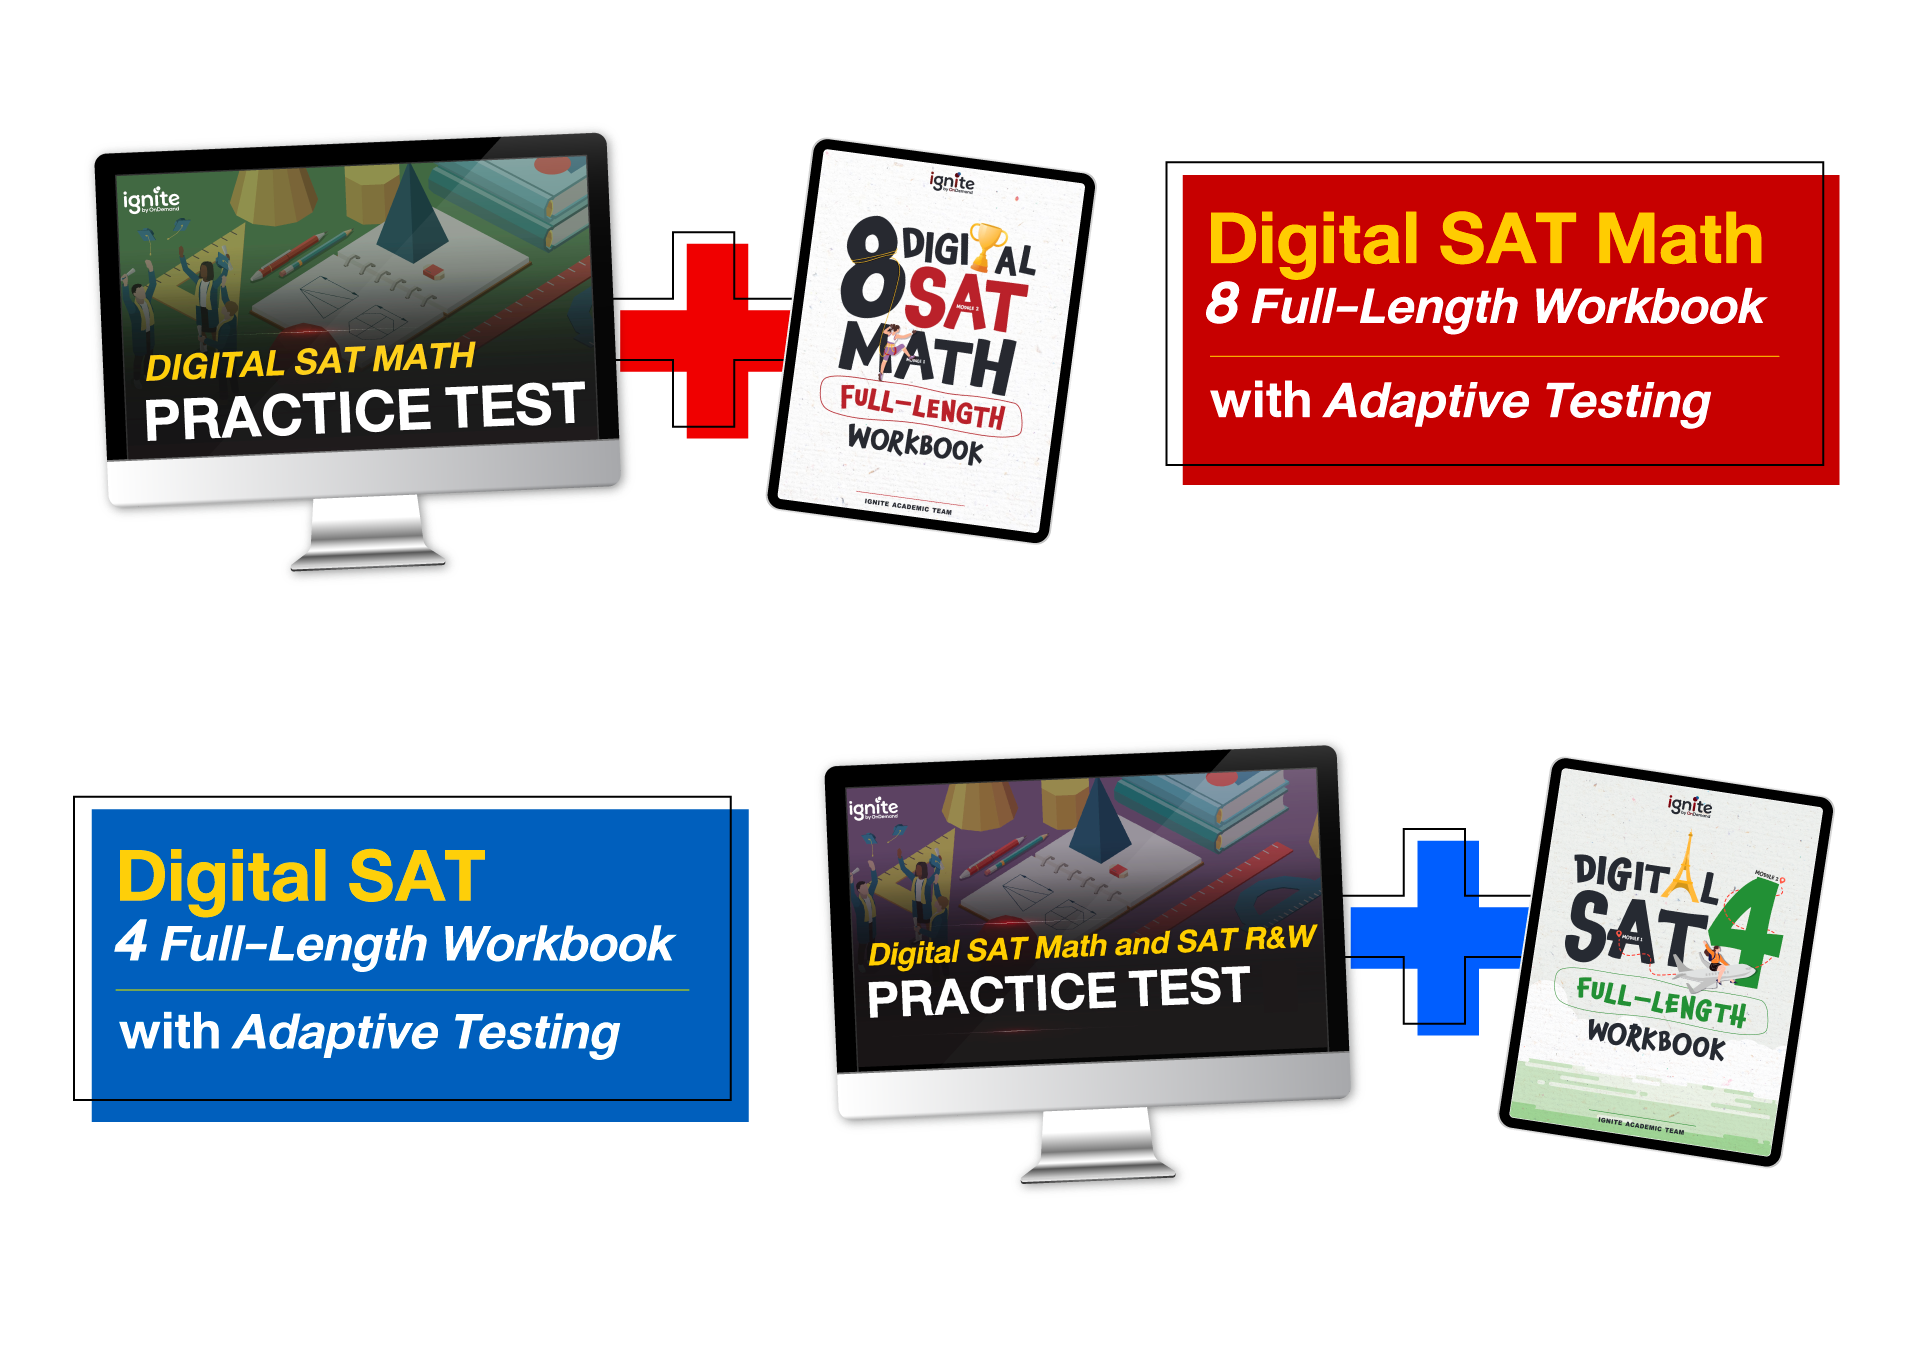 digital sat practice test to increase your score with ignite by ondemand